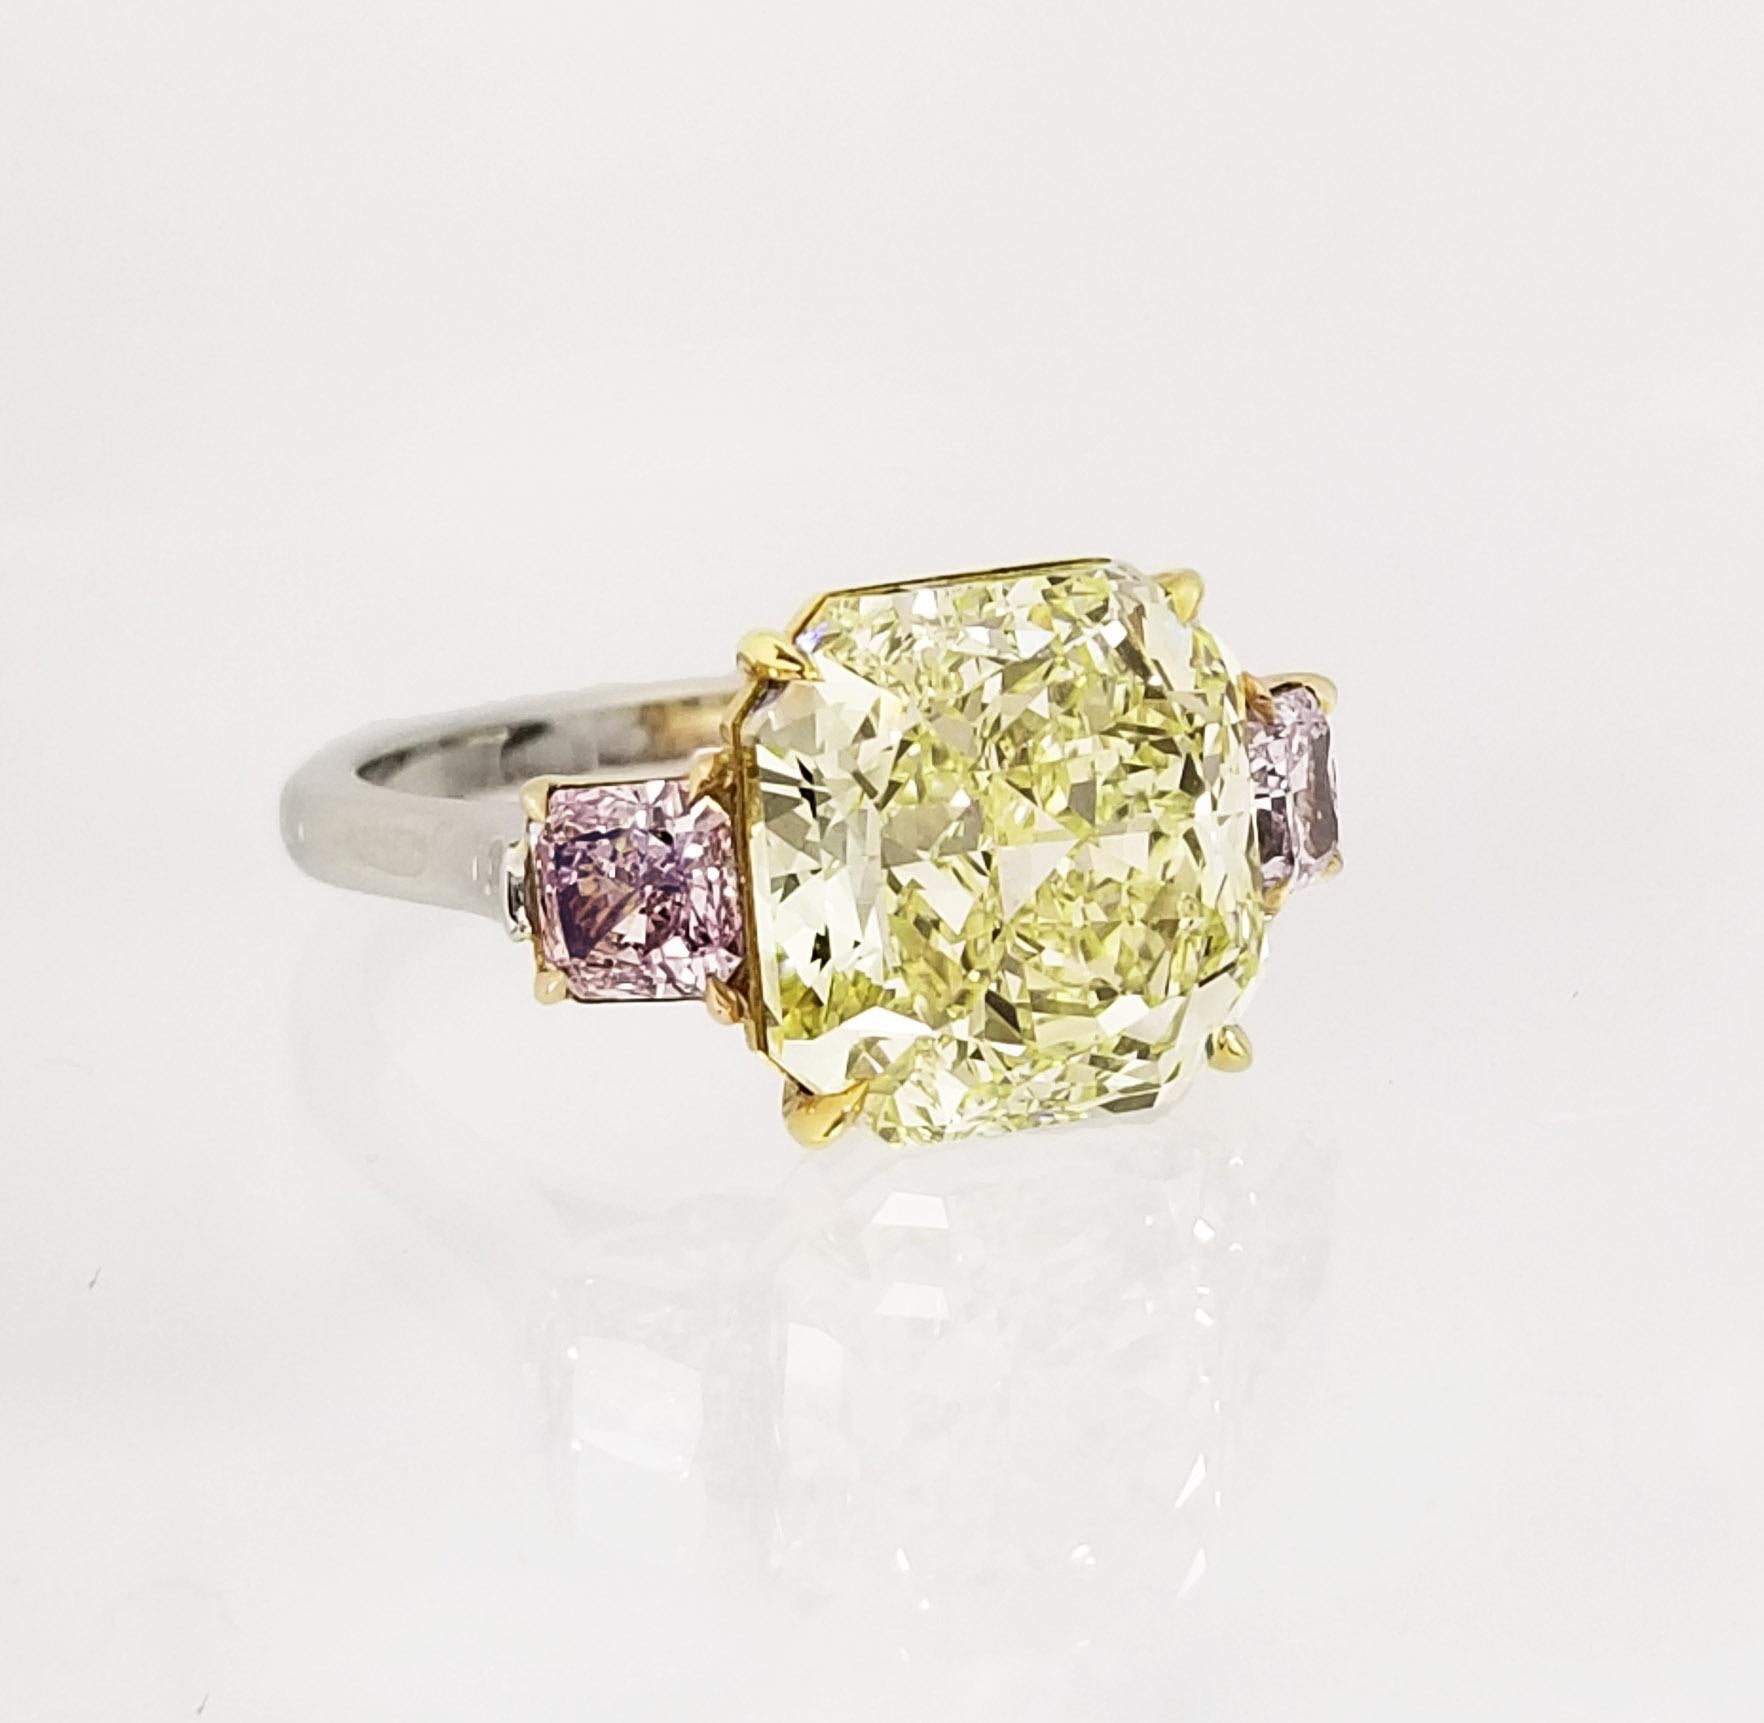 Contemporary Scarselli GIA 7 Carat Yellow Radiant and Pink Cushion Diamond Ring in Platinum For Sale